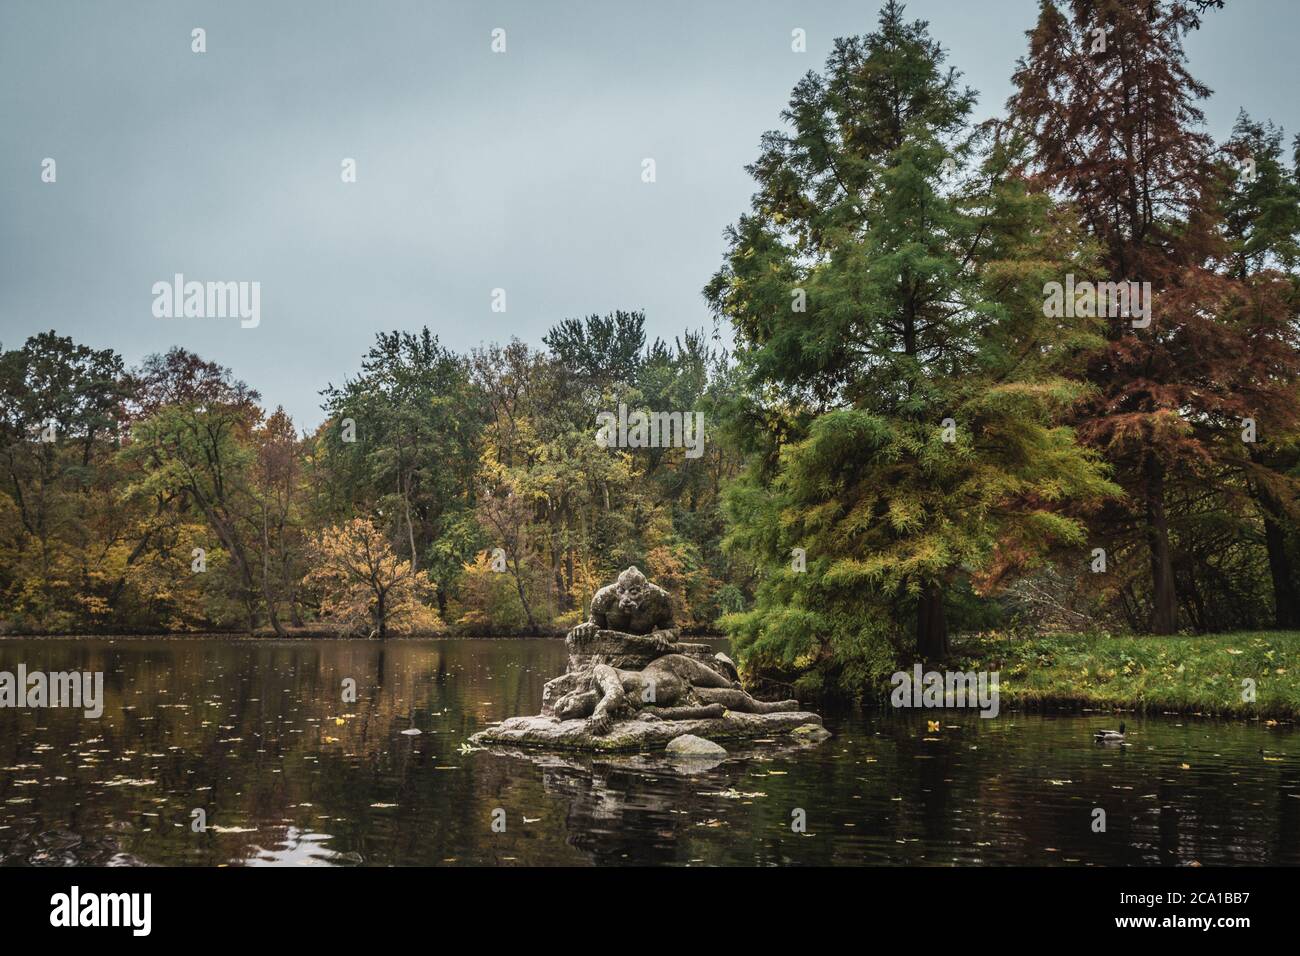 Statue in a lake of Treptower Park in Berlin, Germany. Stock Photo